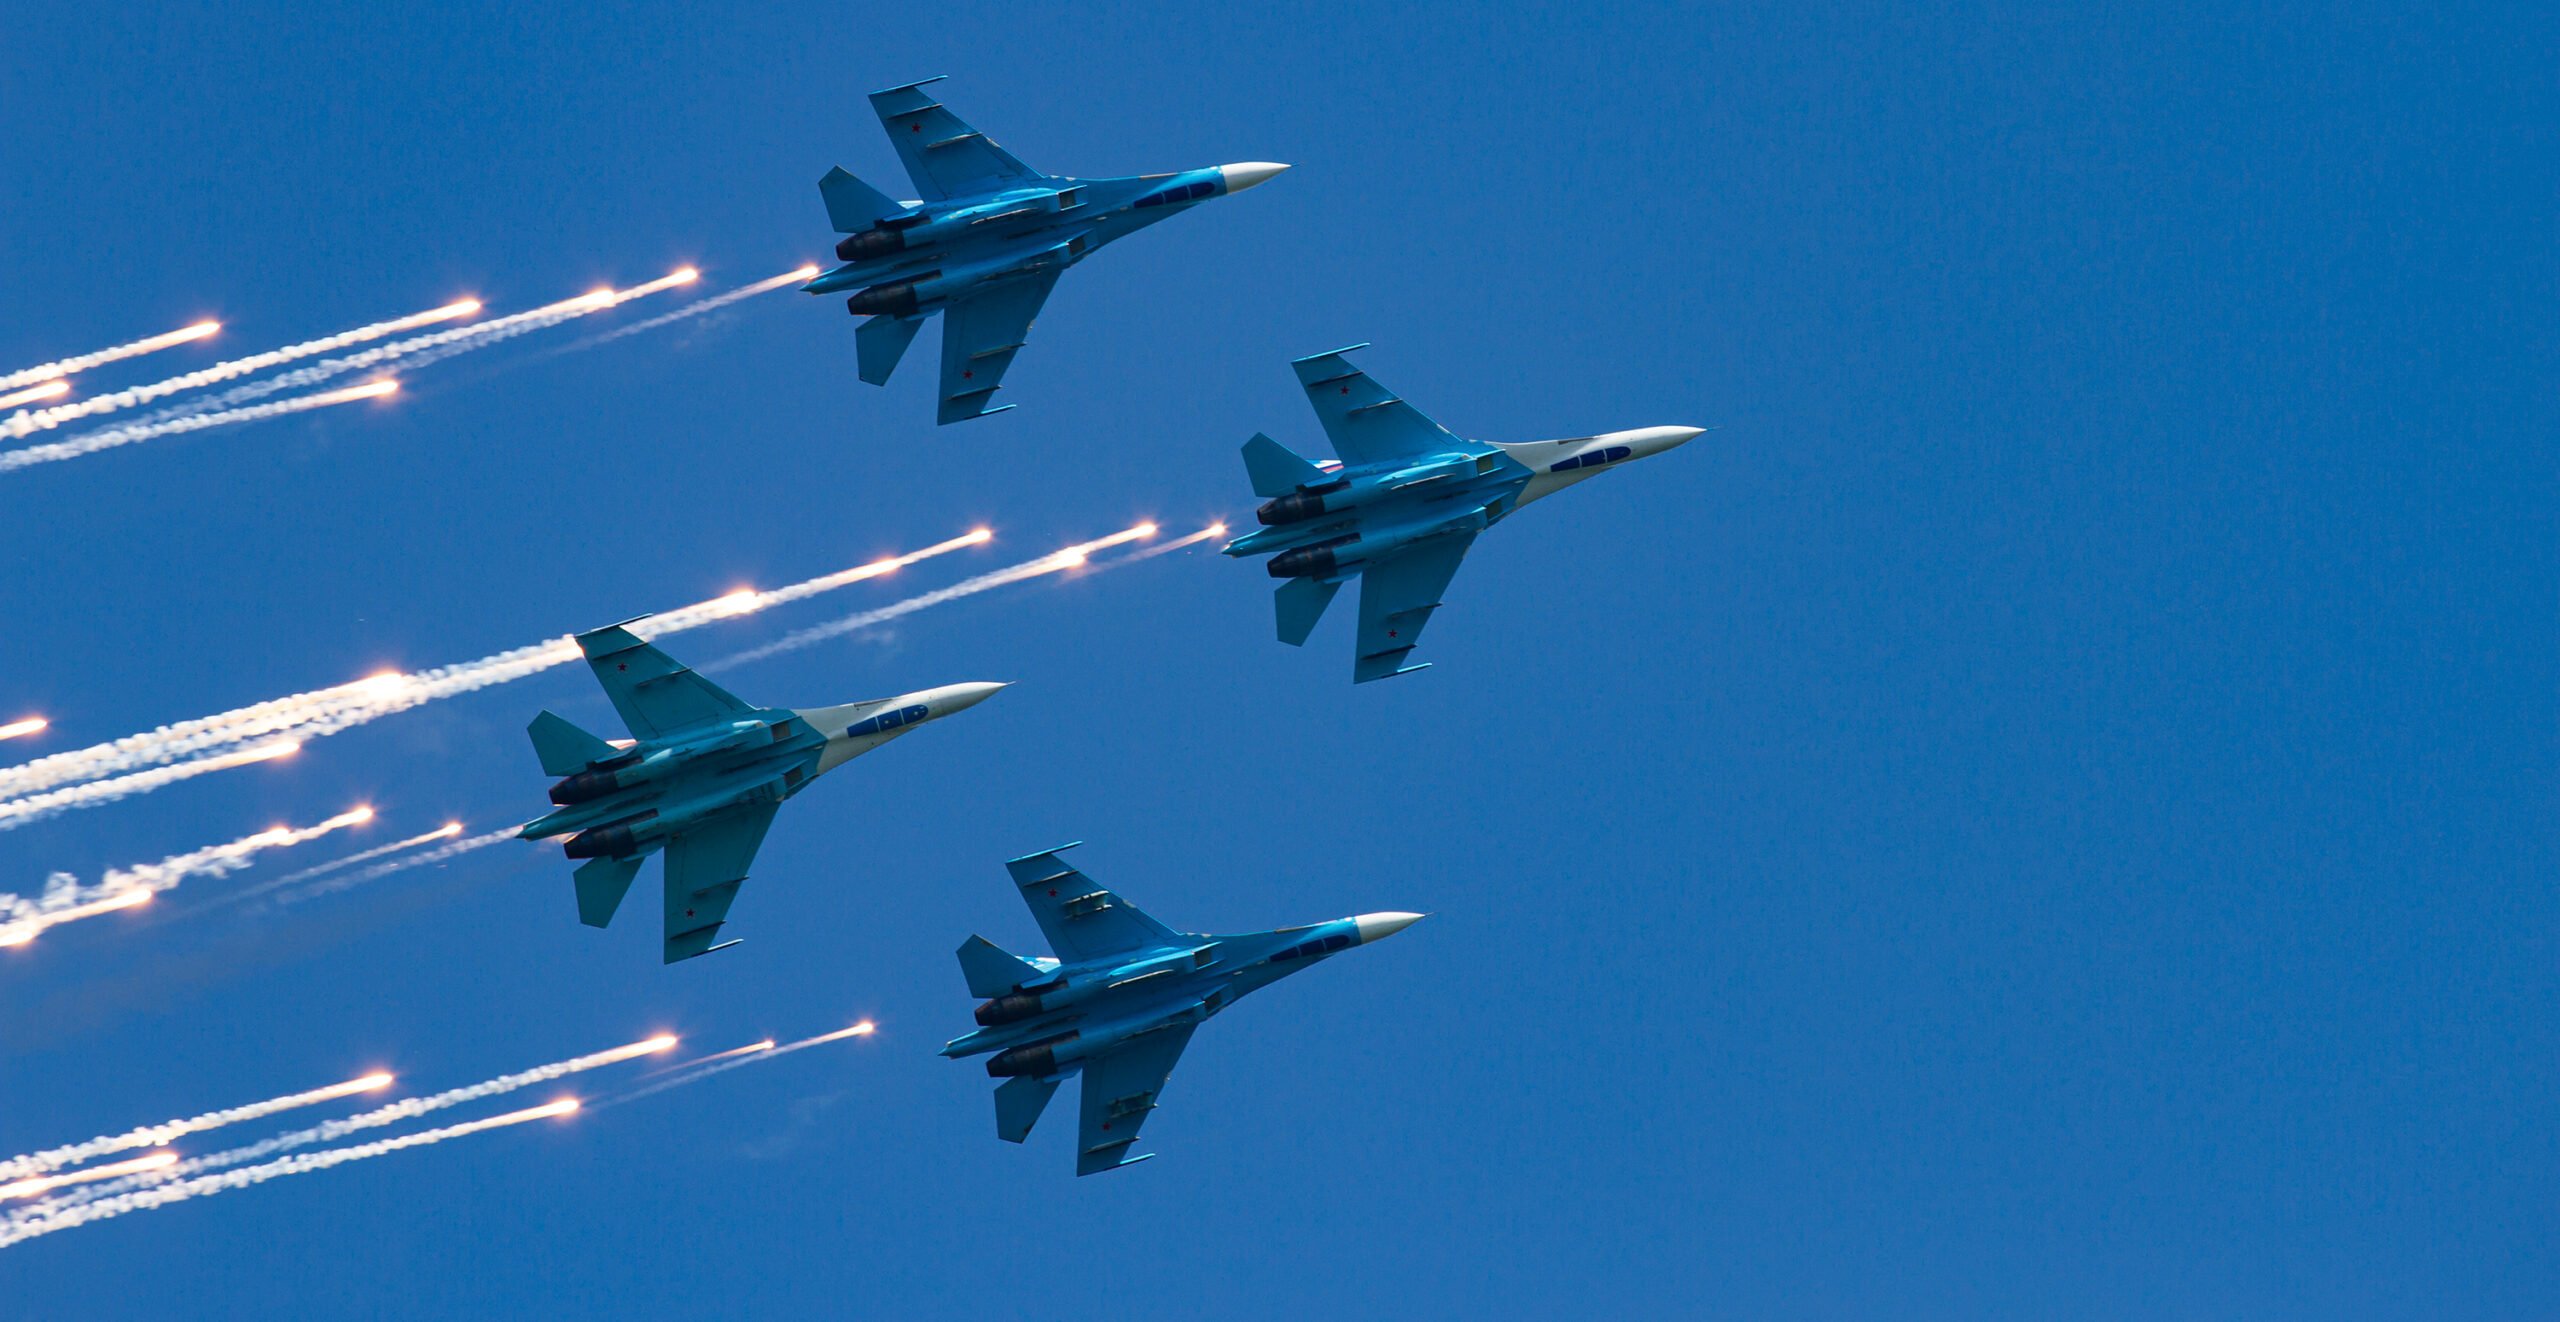 How Ukraine managed to down 13 Russian planes in 11 days